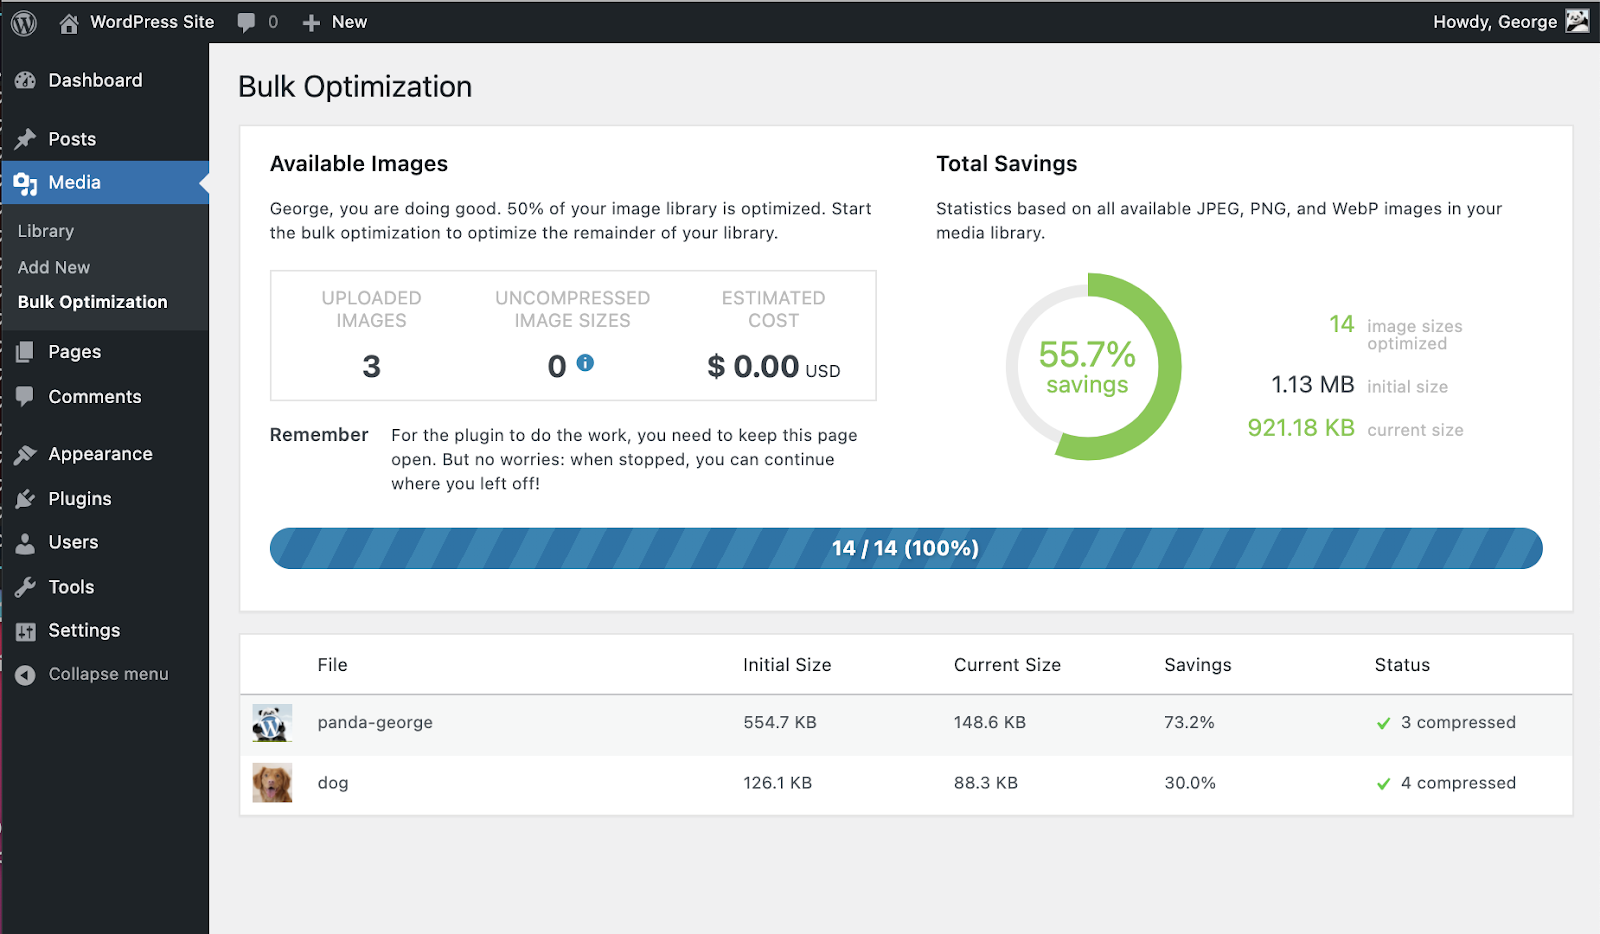 "Available images" and "Total savings" section shown in “Bulk Optimization” plugin